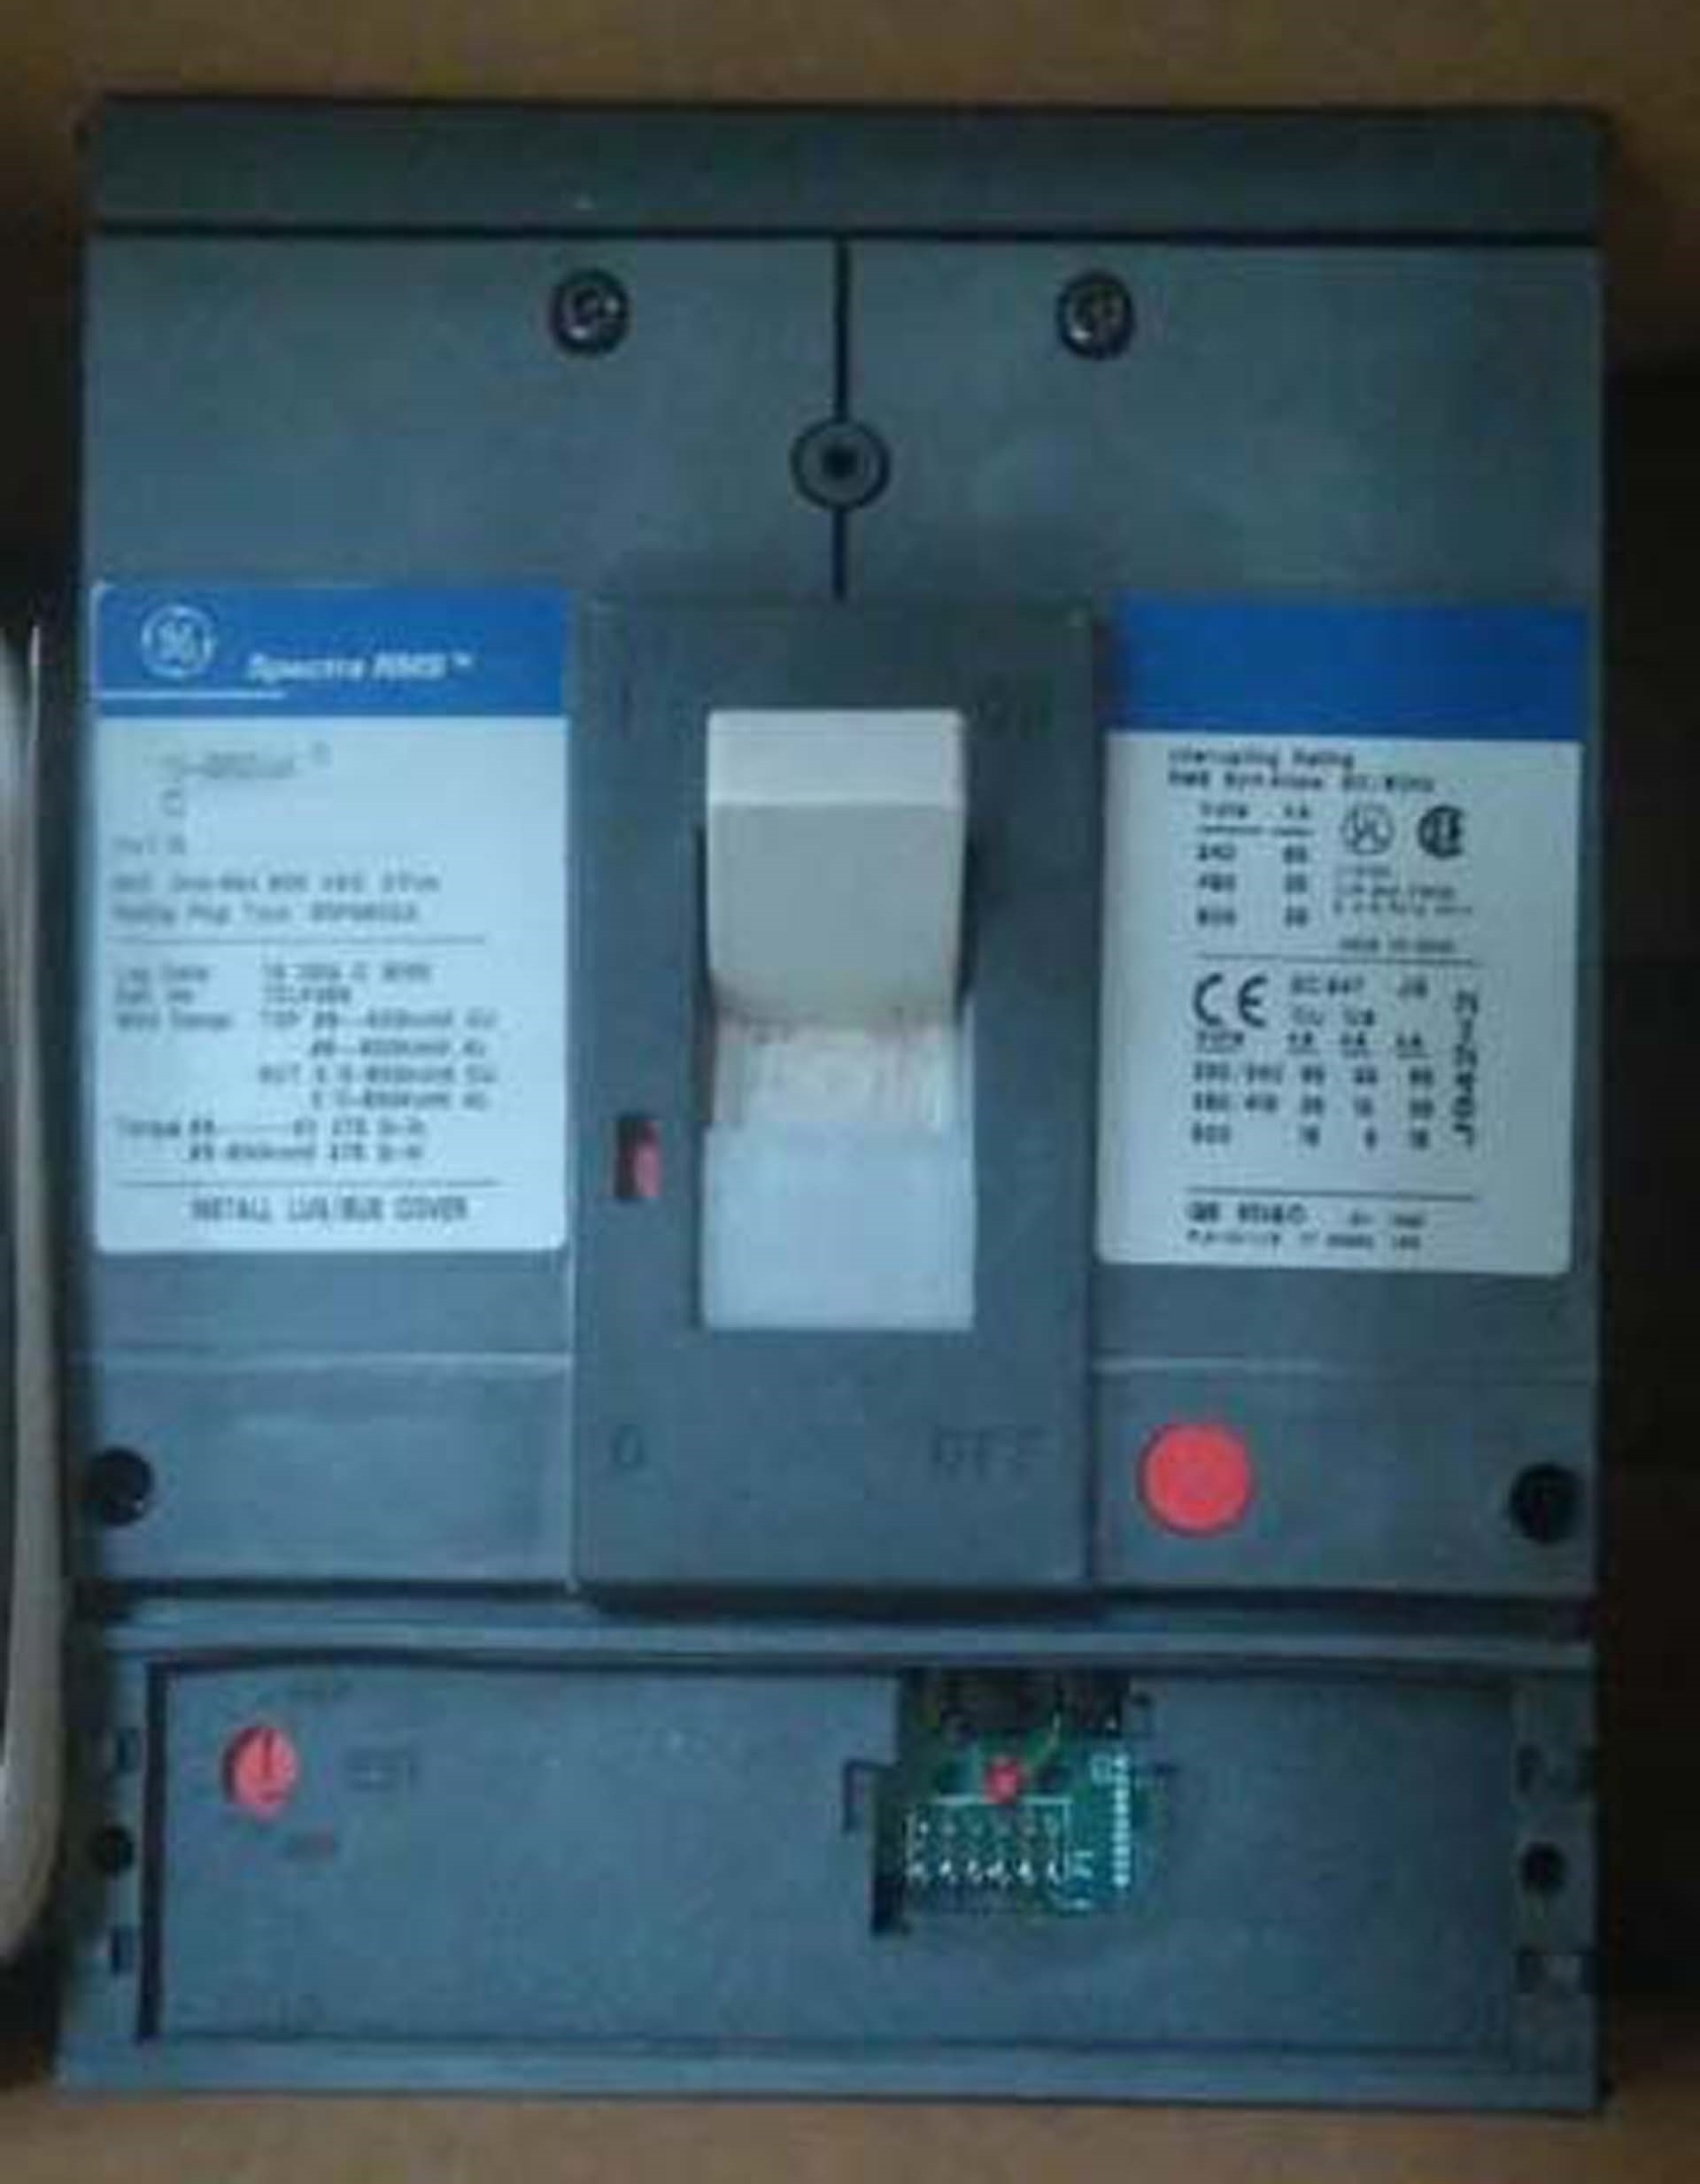 Photo Used GENERAL ELECTRIC Spectra RMS For Sale